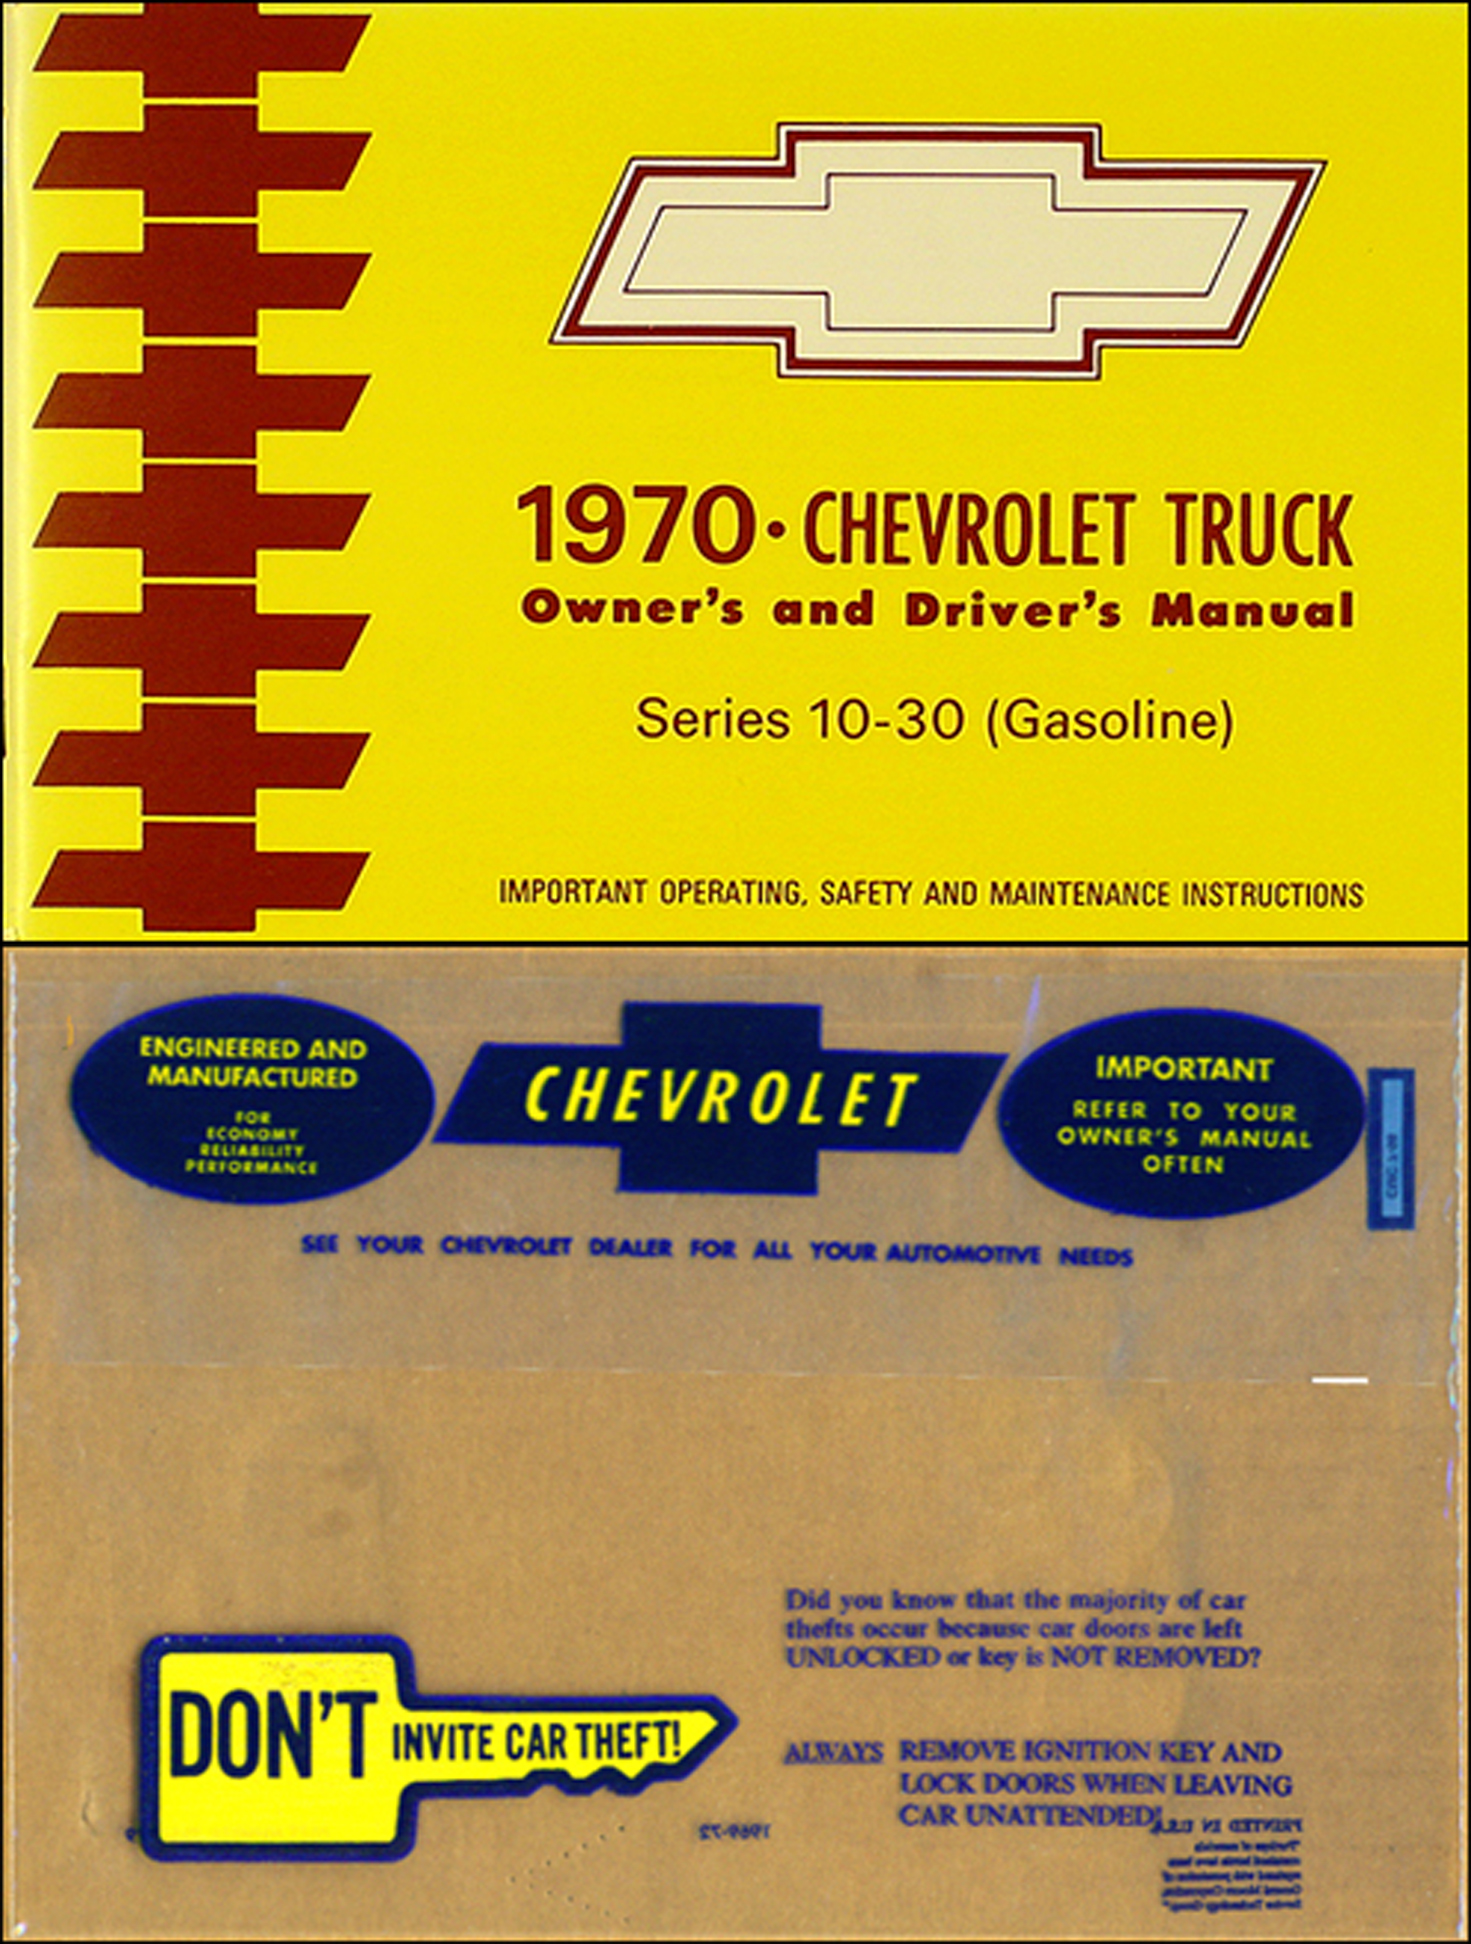 1970 Chevrolet ½-, ¾-, & 1-ton Truck Owner's Manual Package Reprint Pickup/Suburban/Blazer/P-Chassis